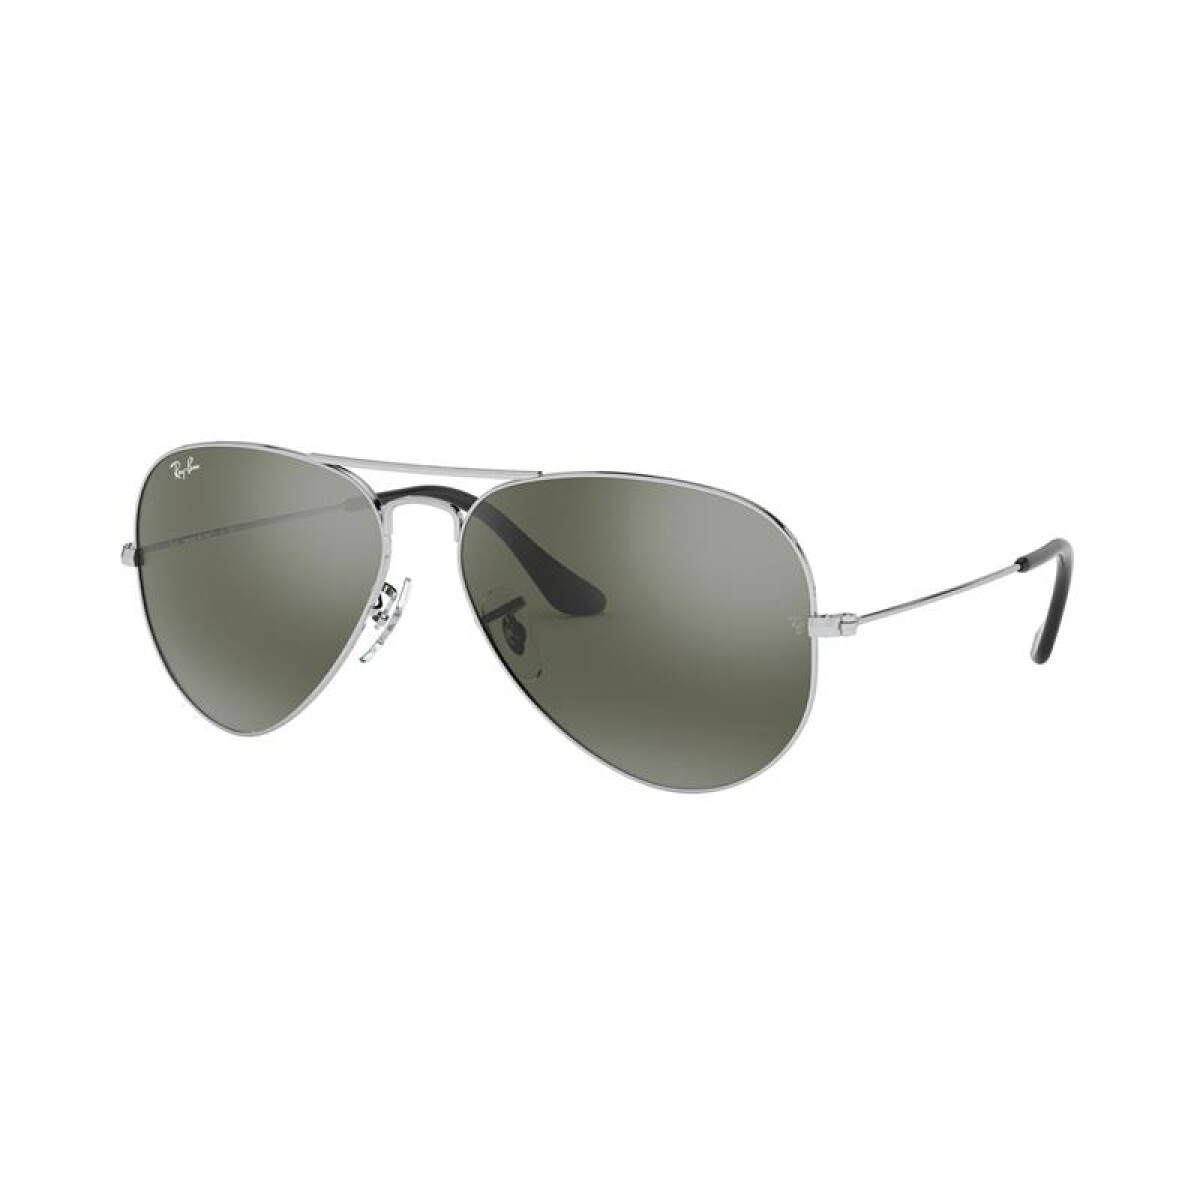 Ray Ban Rb3025 - W3275 